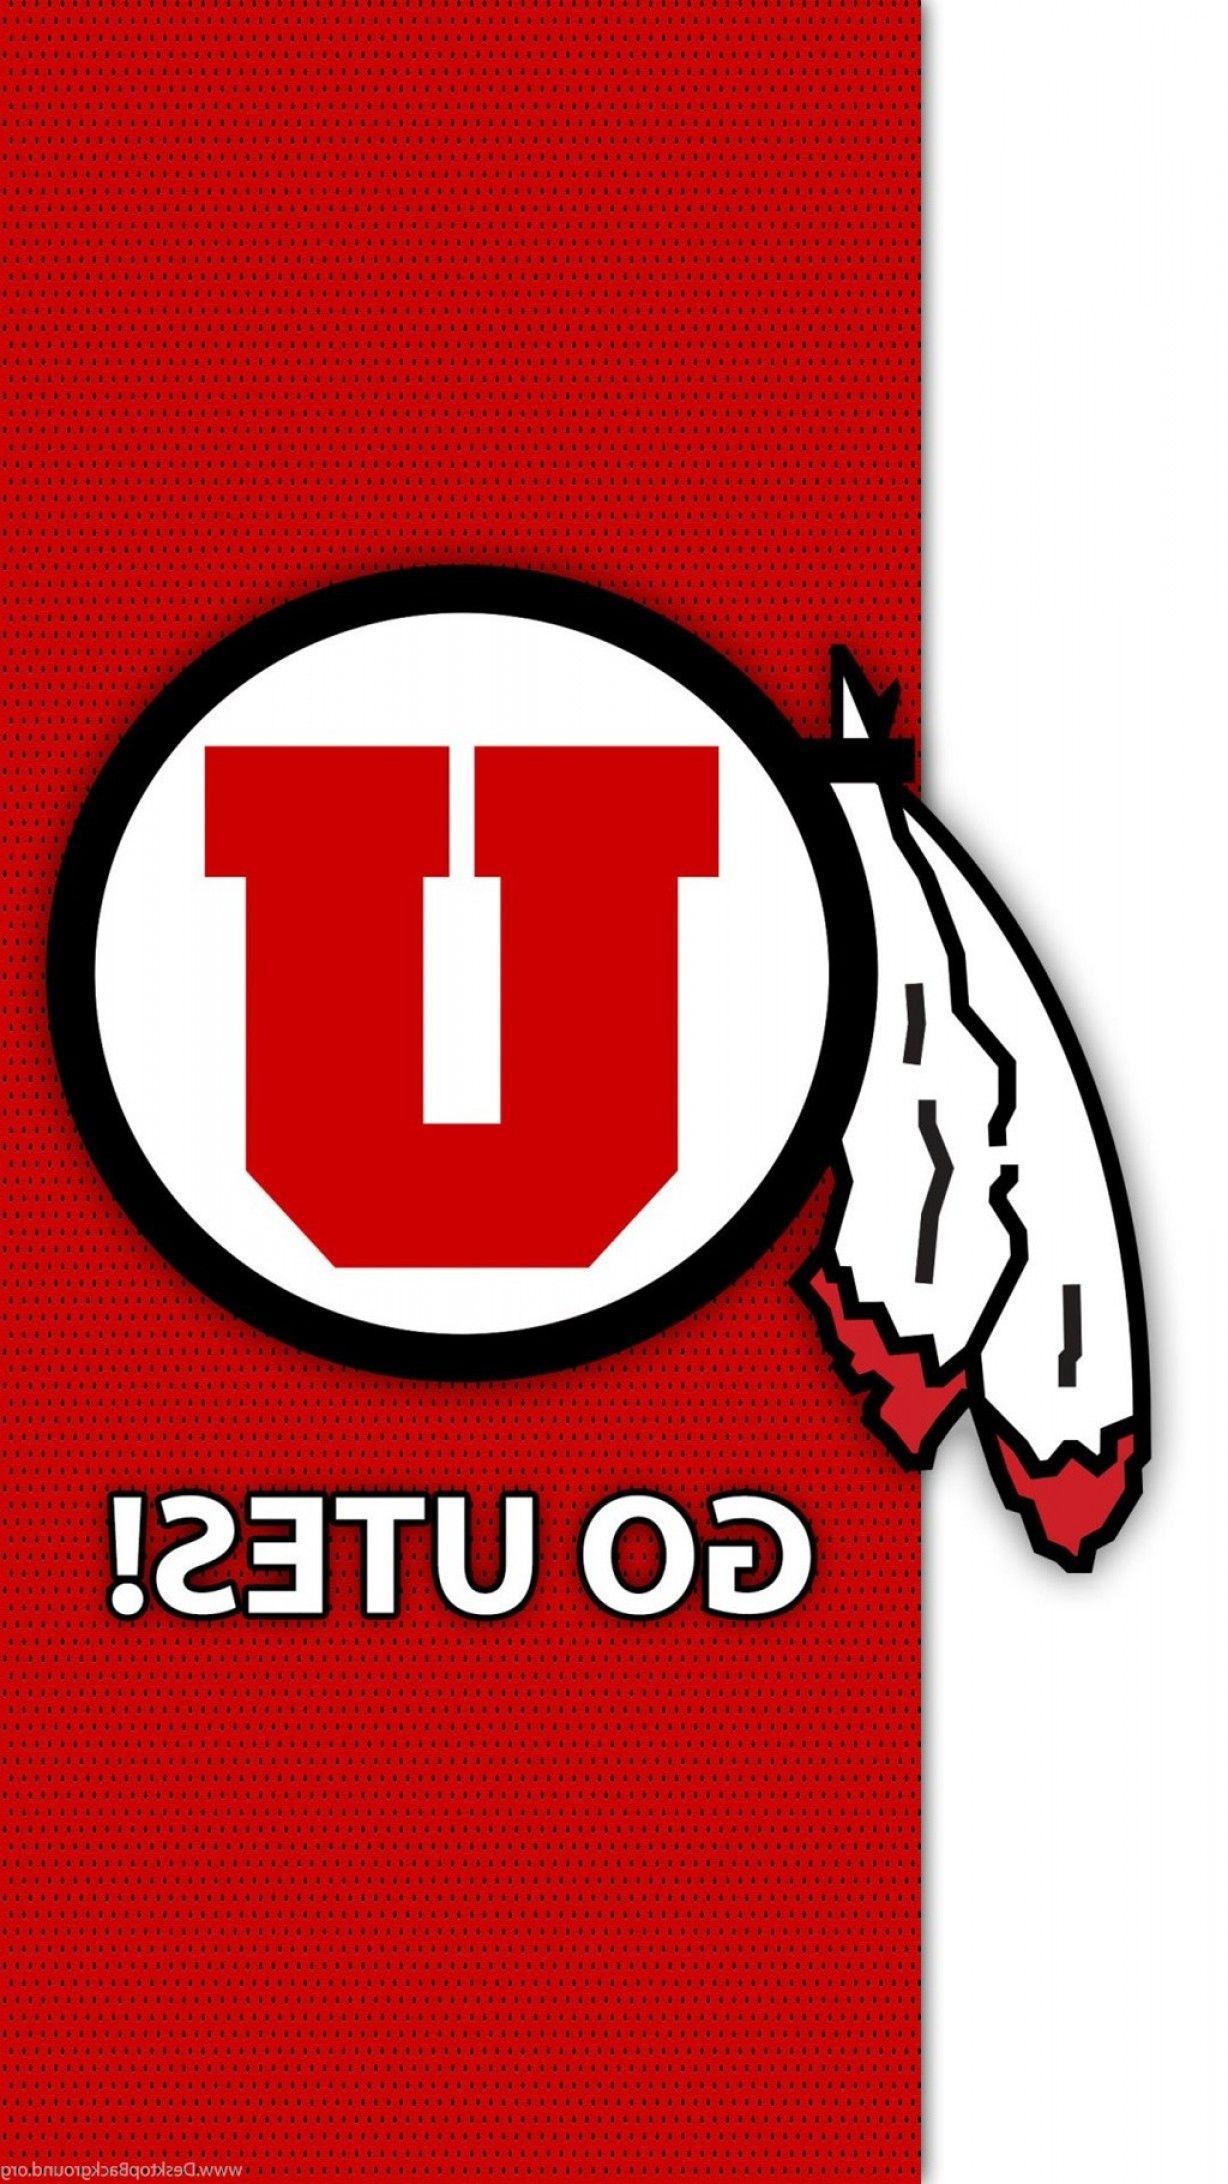 The Utes Logo - Utah Utes A Cell Phone Wallpapers Based On The Logo | sohadacouri